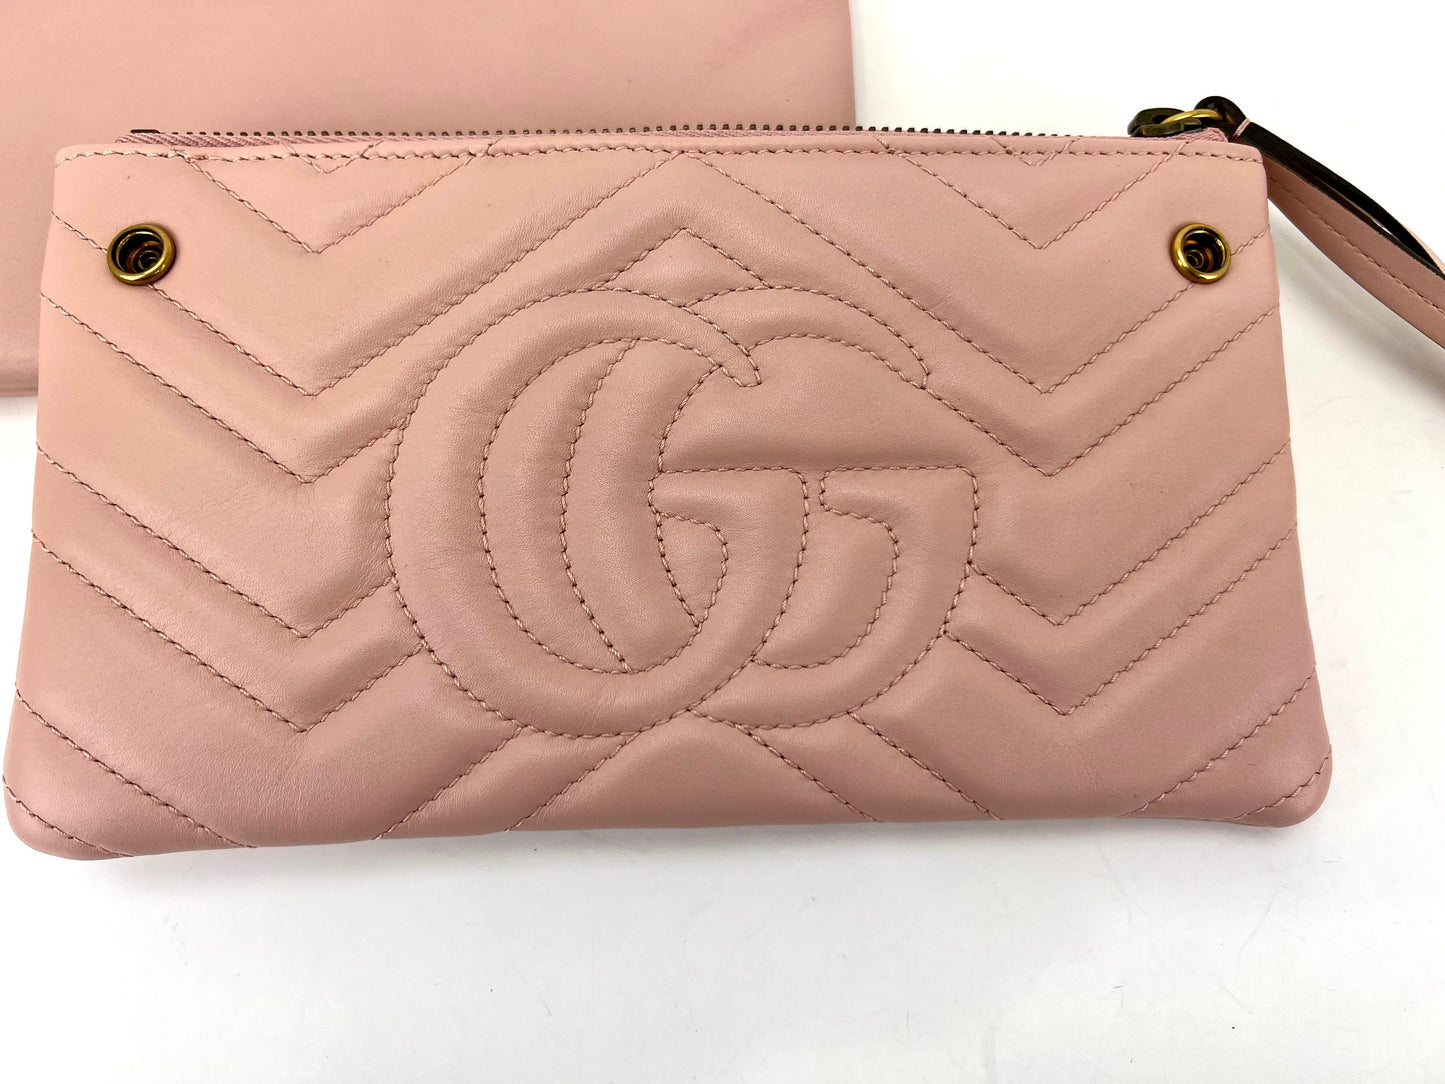 Authentic Gucci GG Marmont Small Top Handle Bag Dusty Pink